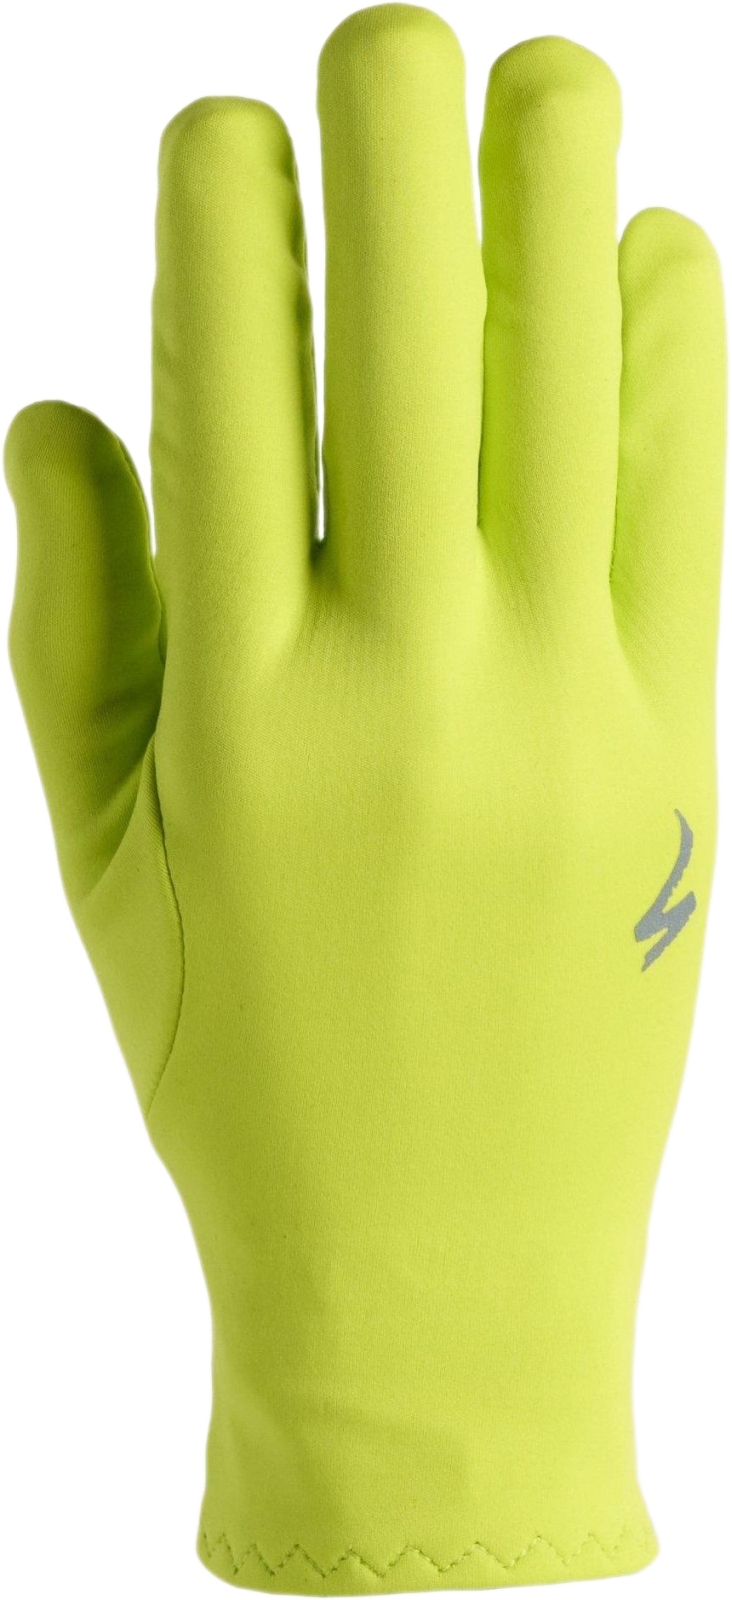 E-shop Specialized Men's Softshell Thermal Glove - hyper green S